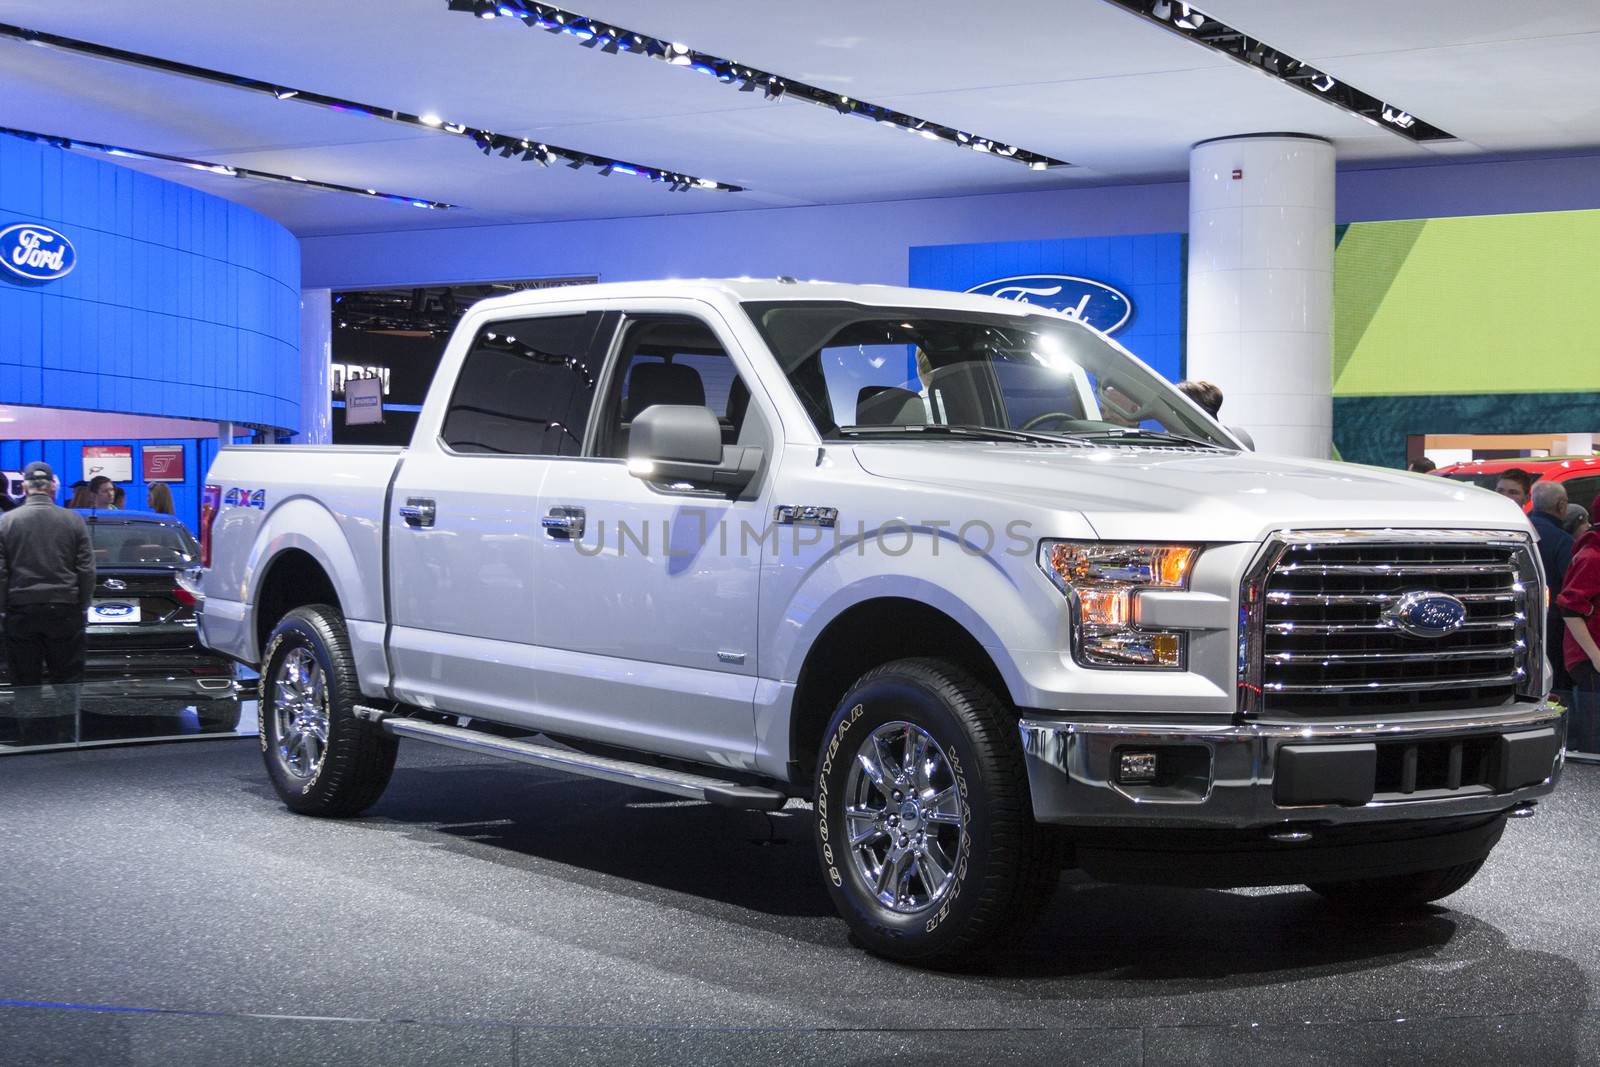 DETROIT - JANUARY 26 :The new 2015 Ford f150 pickup truck at The North American International Auto Show January 26, 2014 in Detroit, Michigan.